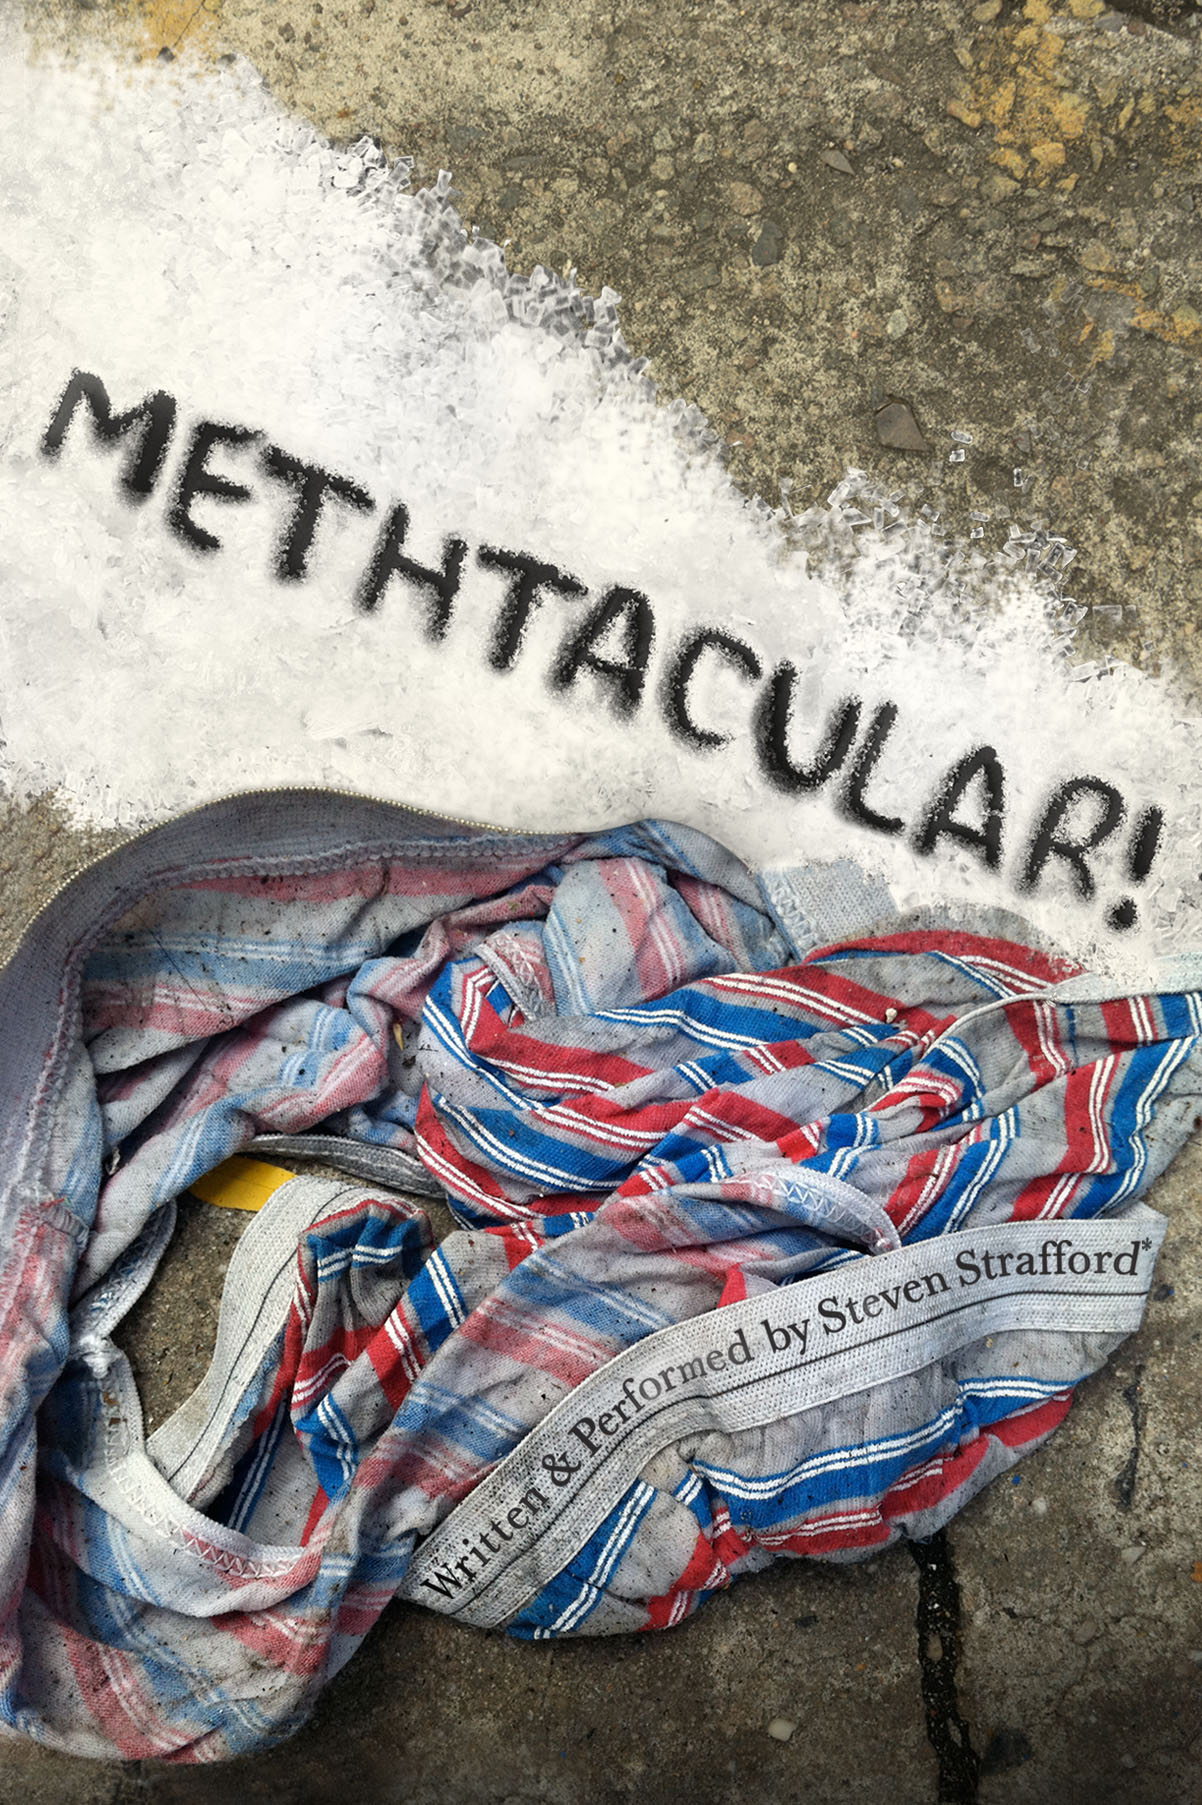 The poster art for "Methtacular," which features the name of the production above an illustration of a dirty blanket on the sidewalk.